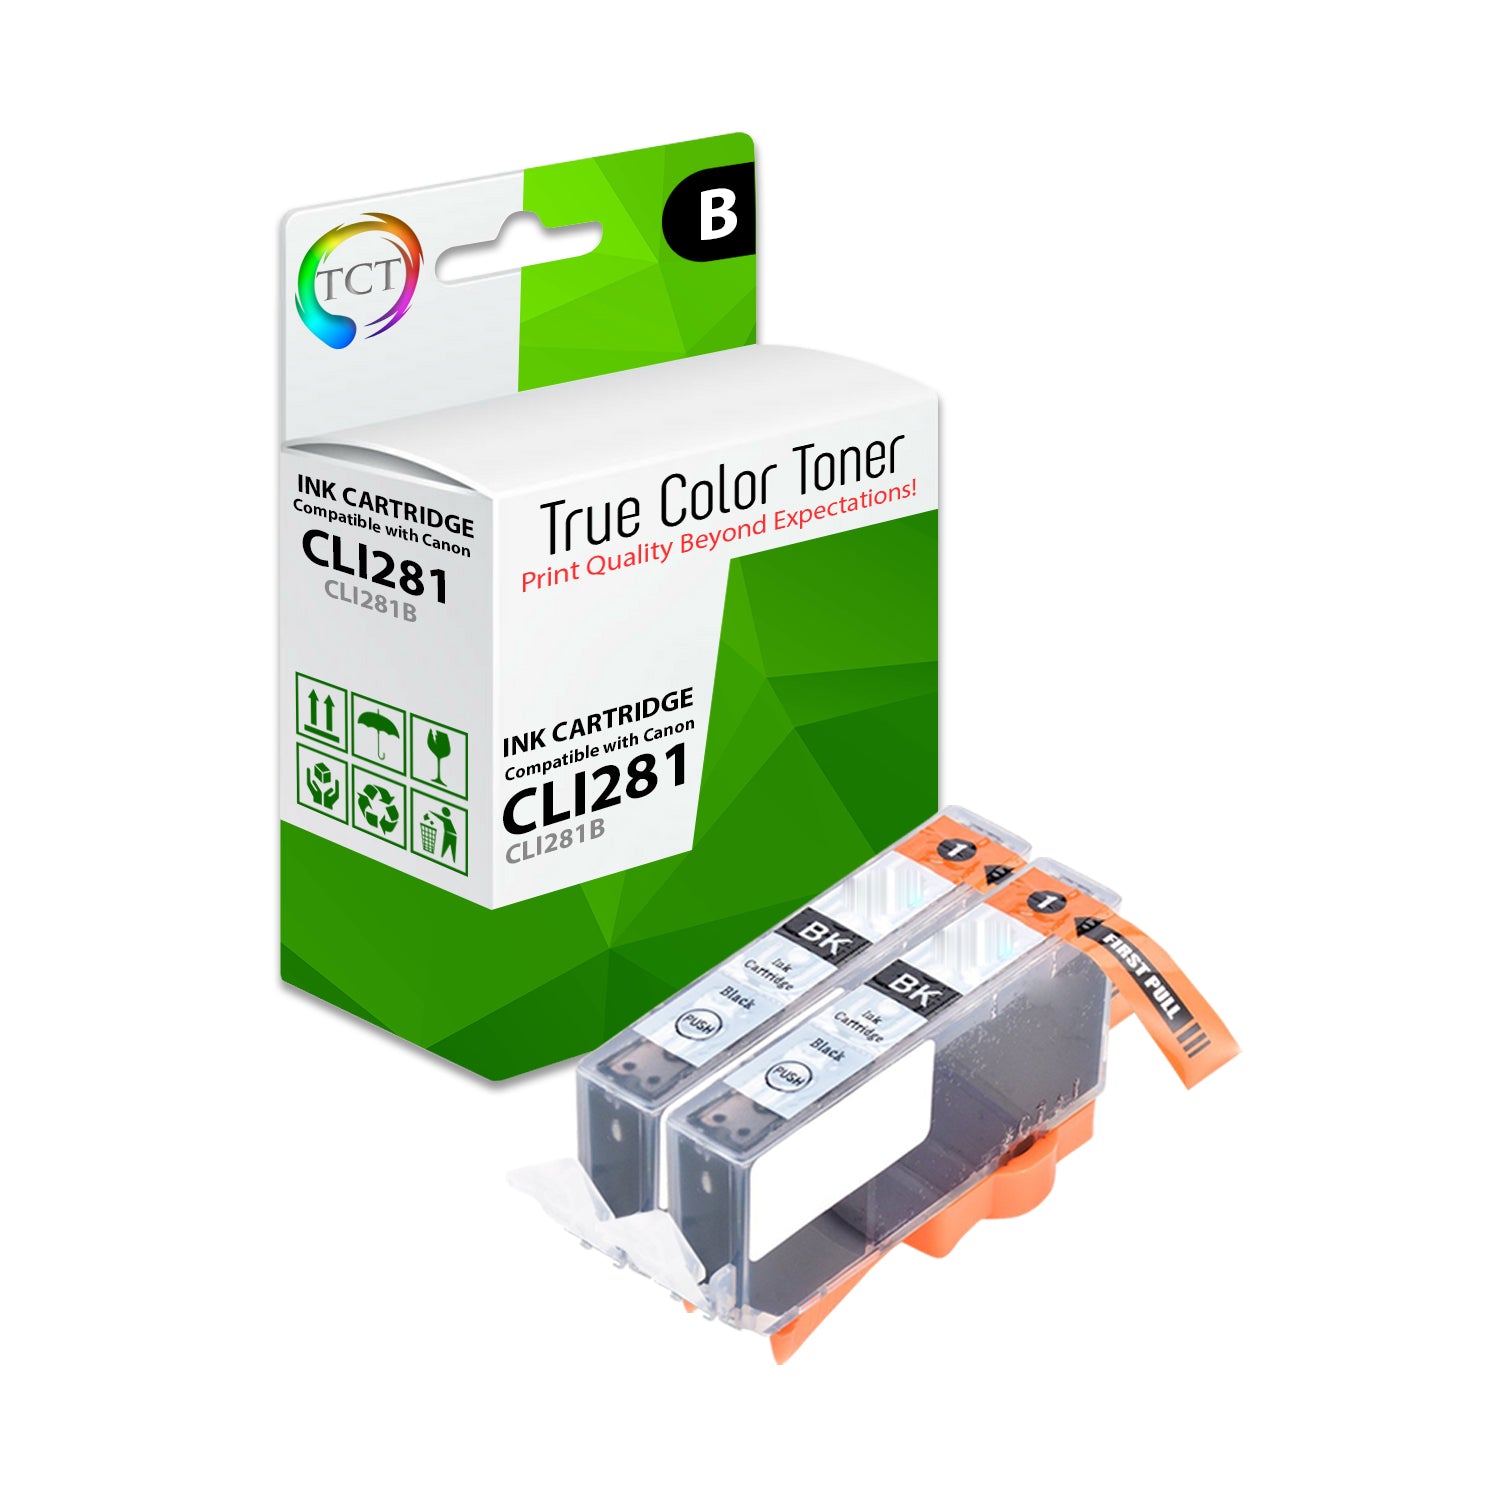 TCT Compatible Ink Cartridge Replacement for the Canon CLI-281 Series - 2 Pack Black